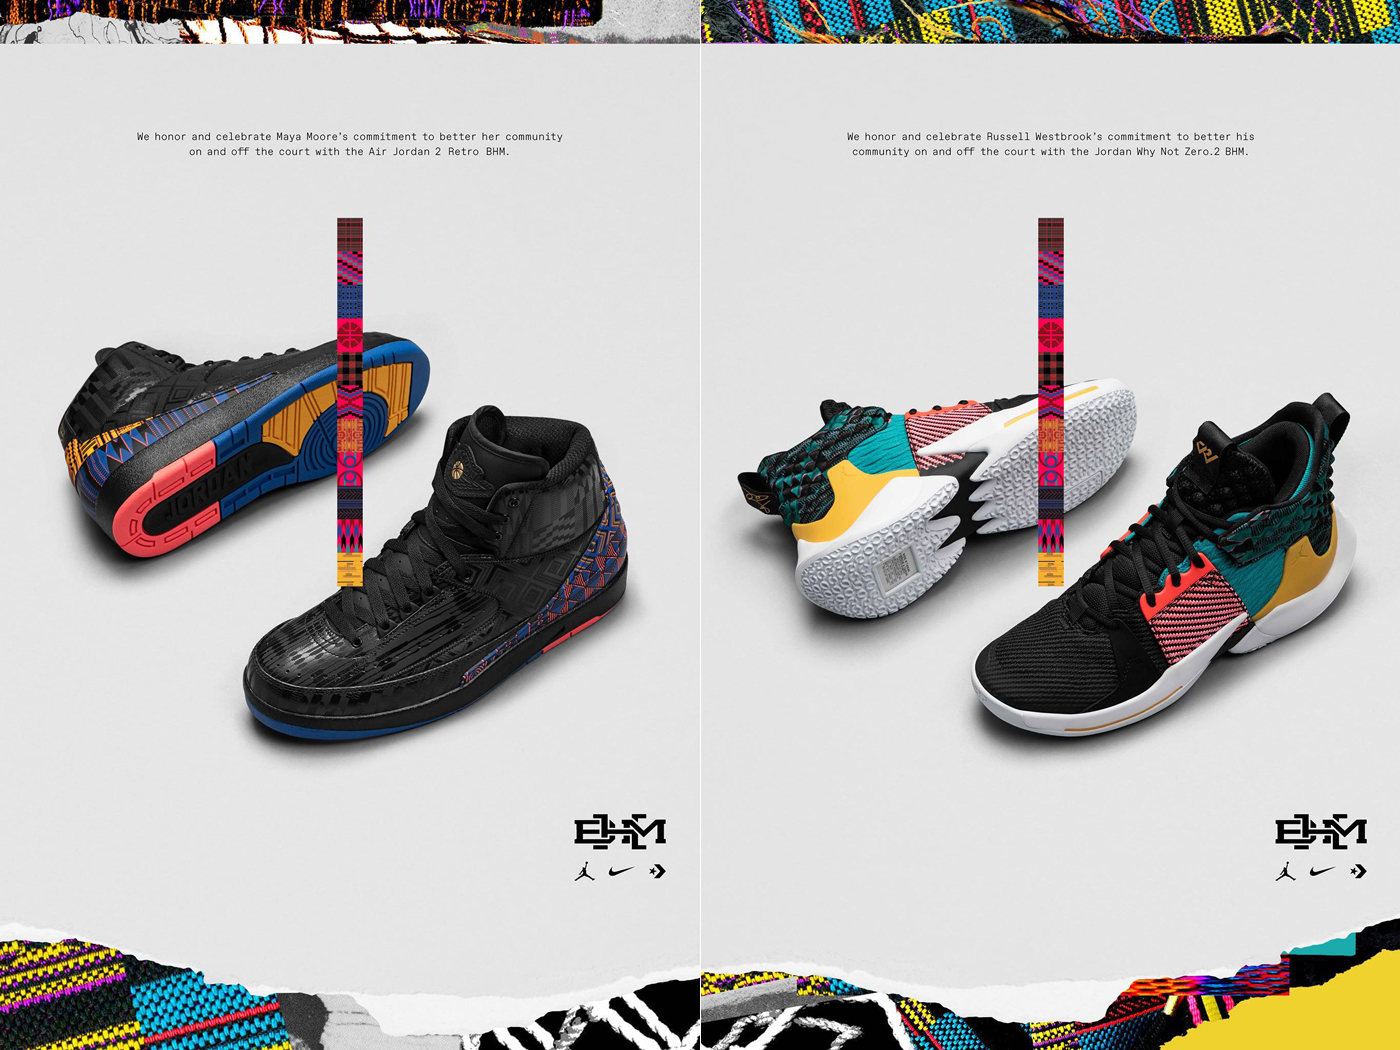 Where to Buy the Jordan BHM 2019 Shoes 